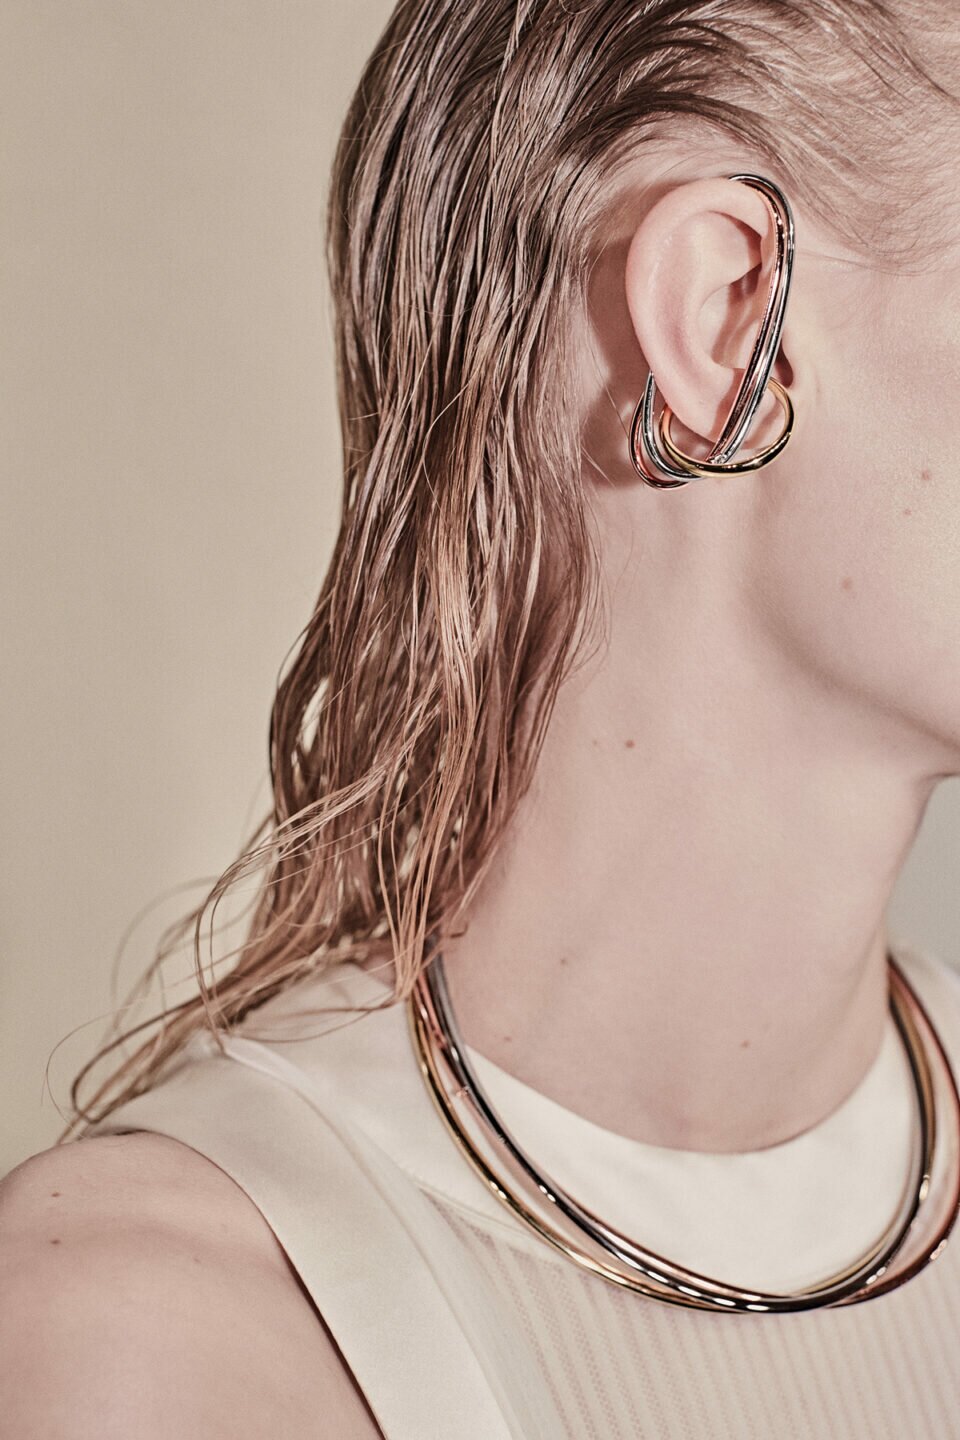 The Sparkling New Jewellery Pieces To Bring Versatility And Shine To Your Collection